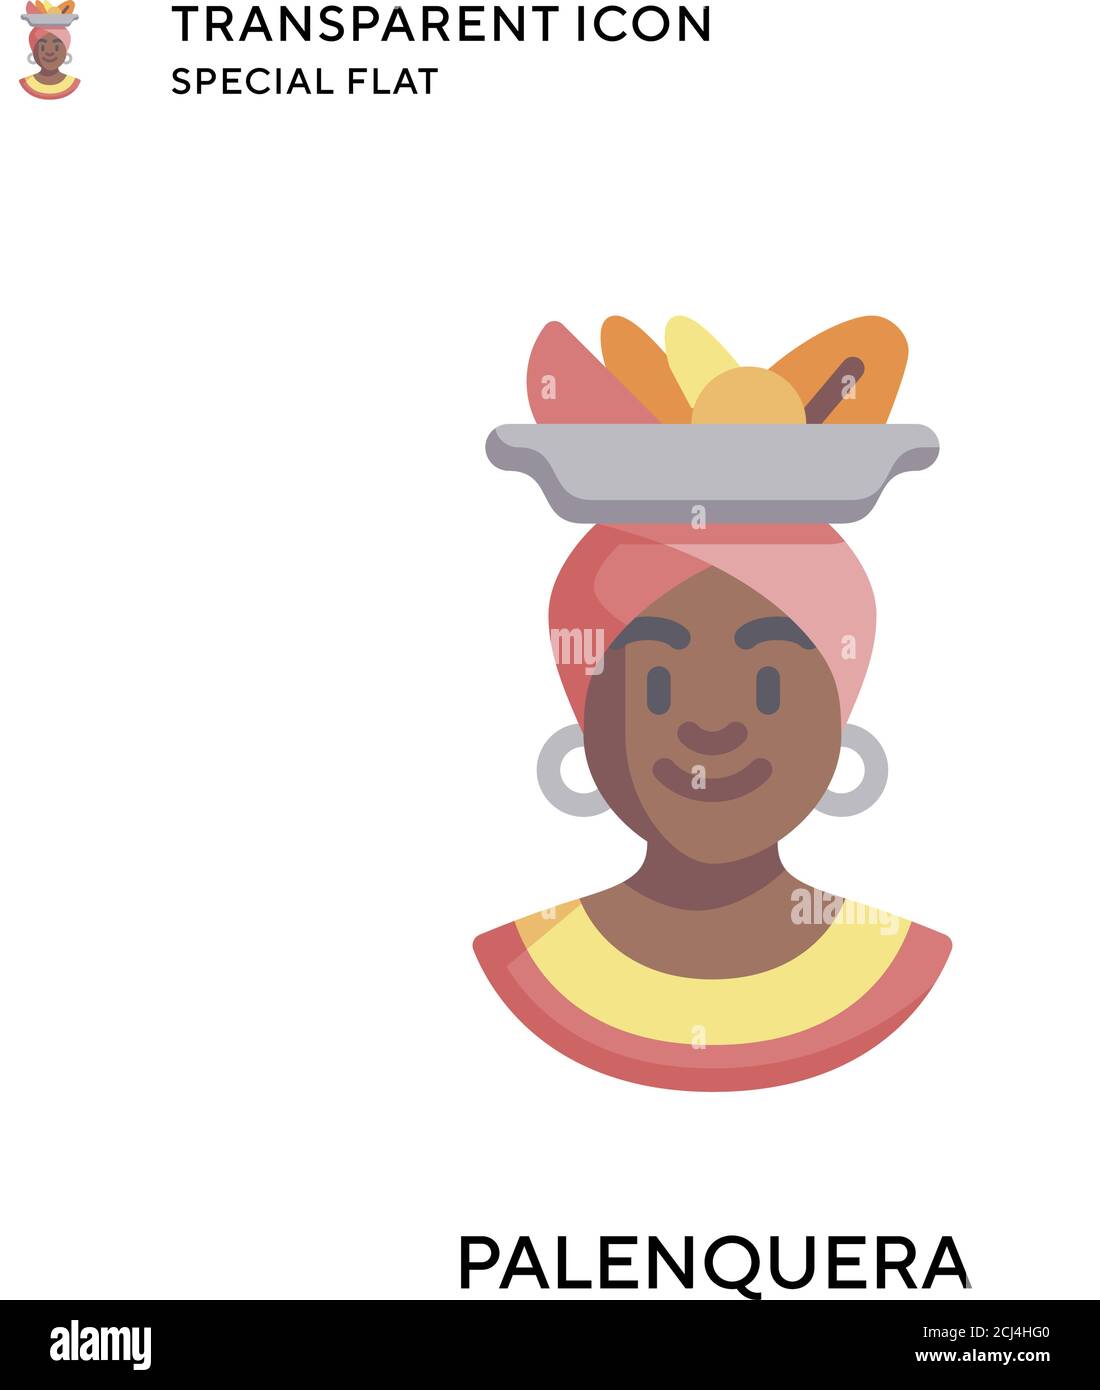 Palenquera vector icon. Flat style illustration. EPS 10 vector. Stock Vector